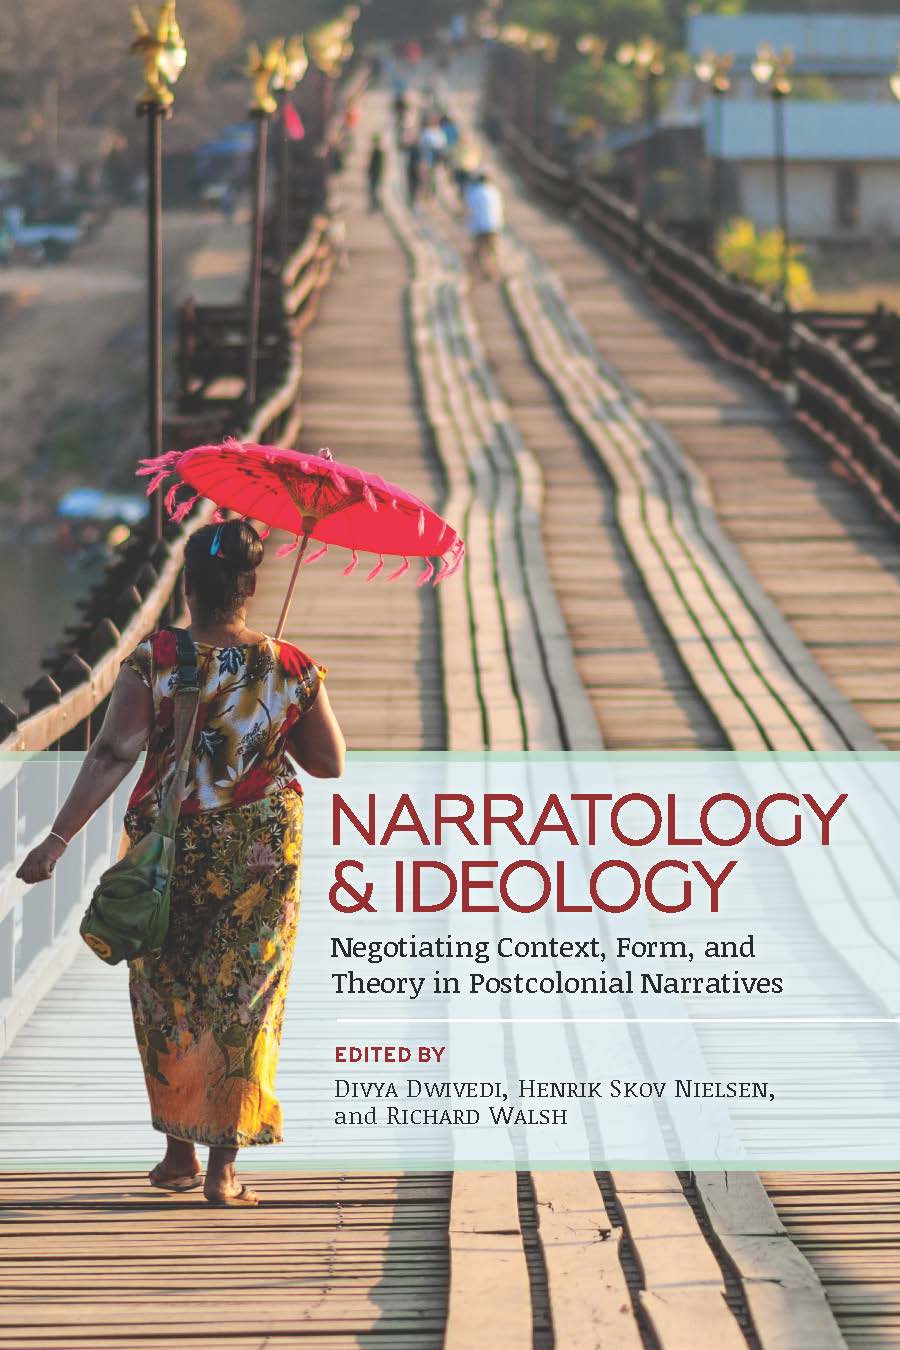 D. Dwivedi, H.S. Nielsen, R. Walsh (dir.), Narratology and Ideology. Negotiating Context, Form, and Theory in Postcolonial Narratives 